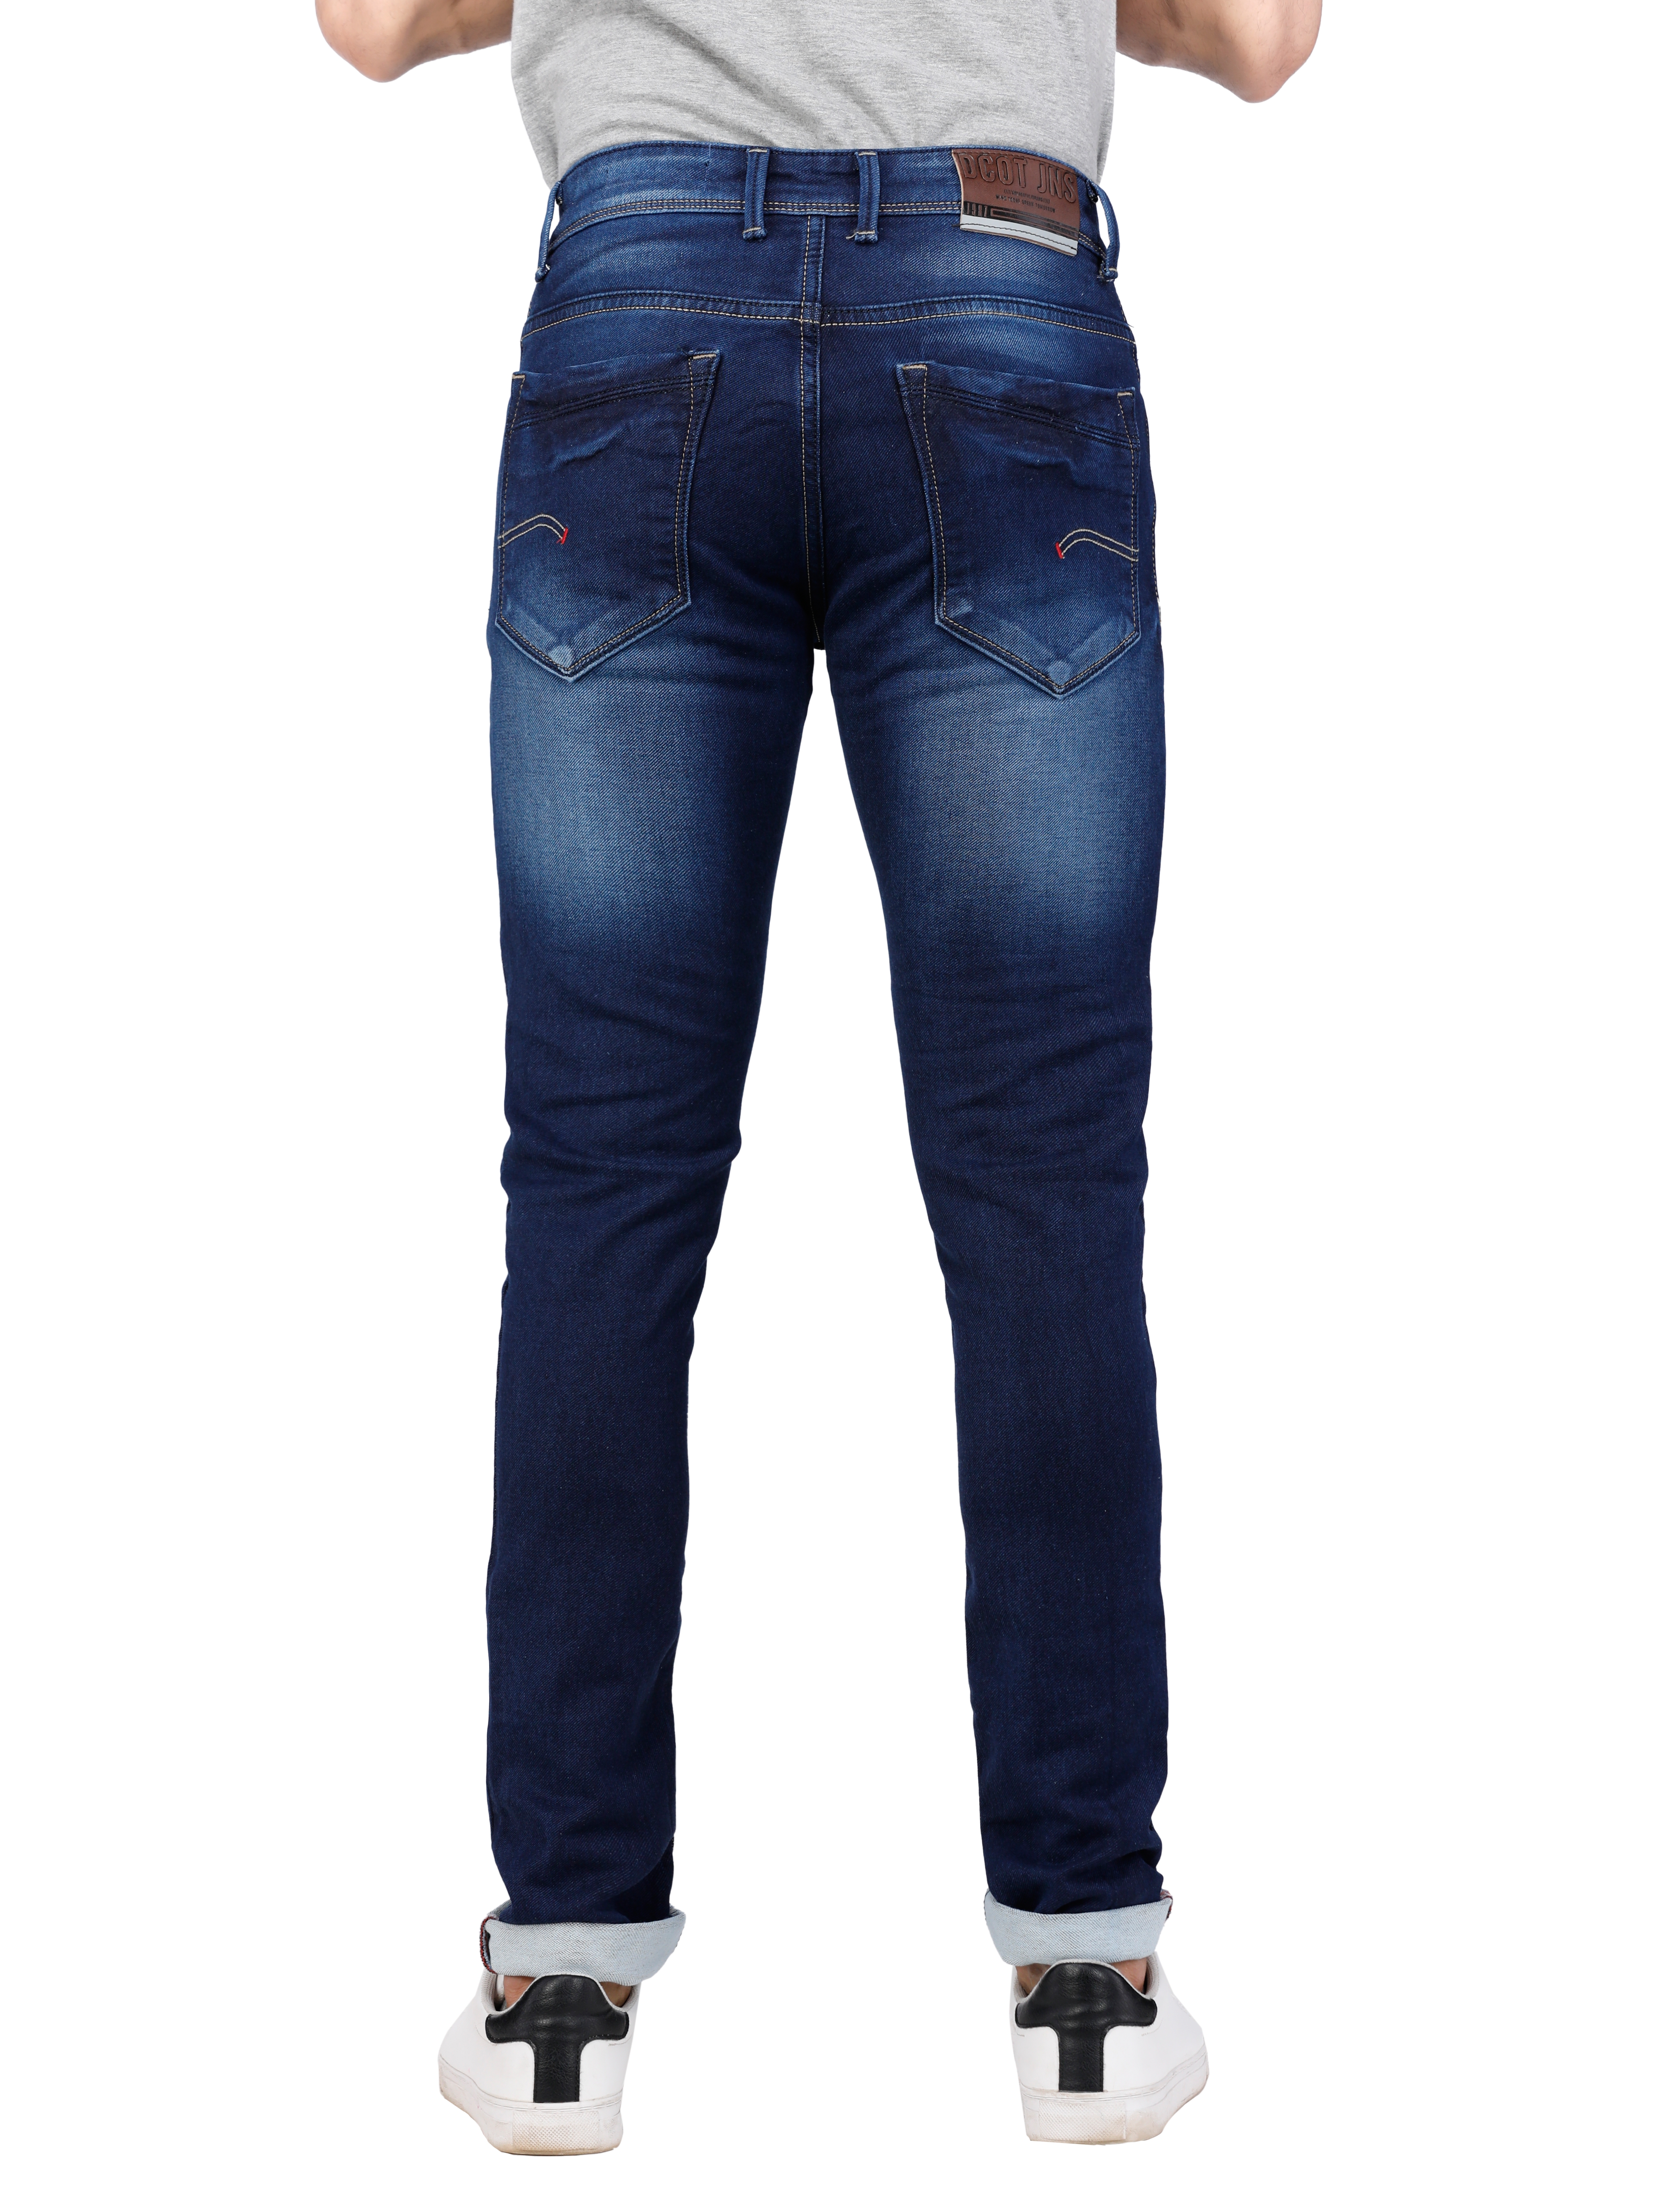 D'cot by Donear | D'cot by Donear Men Blue Cotton Skinny Knitted Jeans